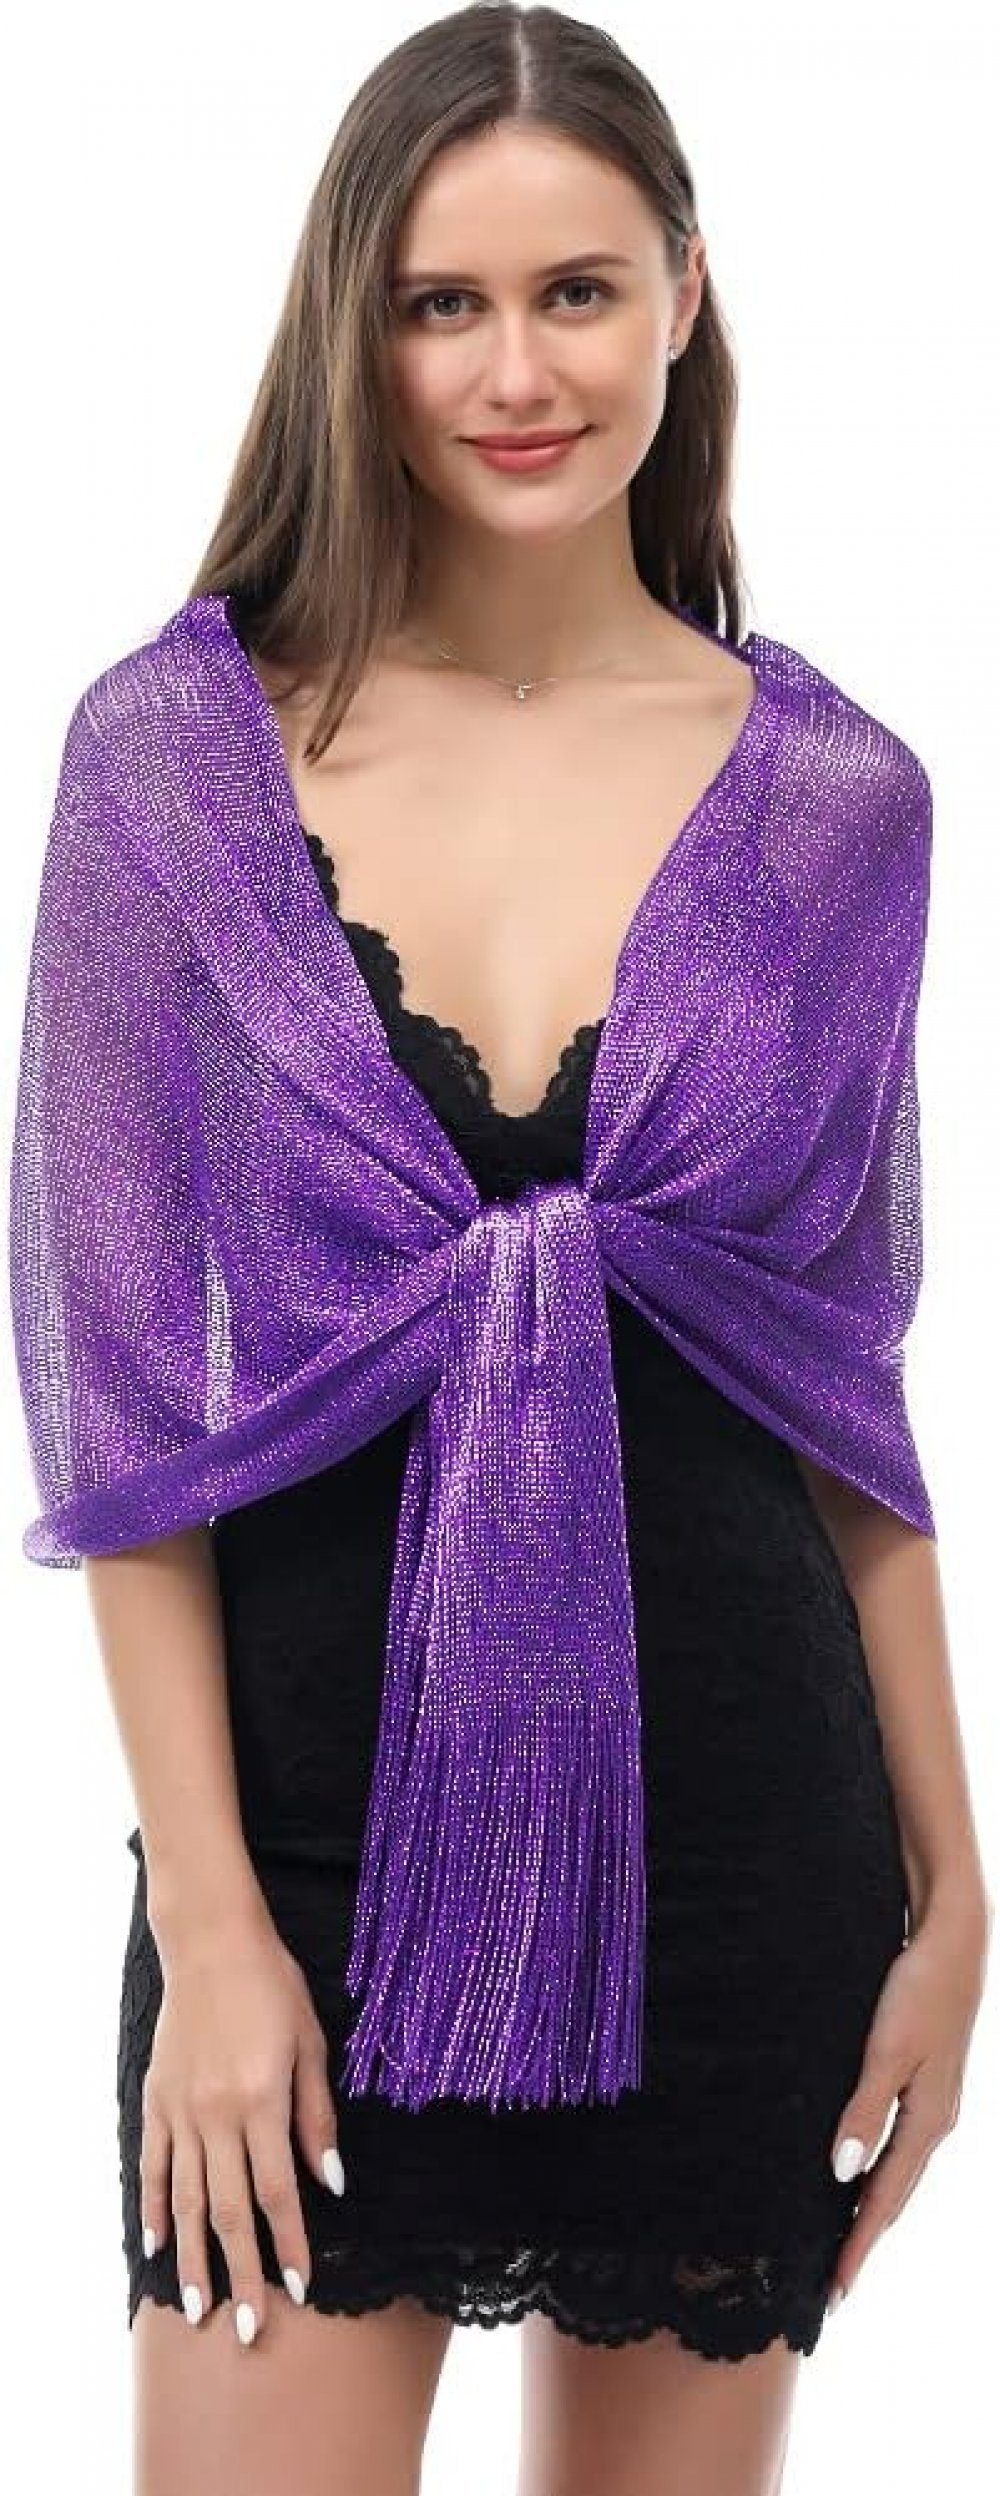 parties Holiday sparkling Tiefviolett suitable evening WaKuKa shawl Schal buckle for metal